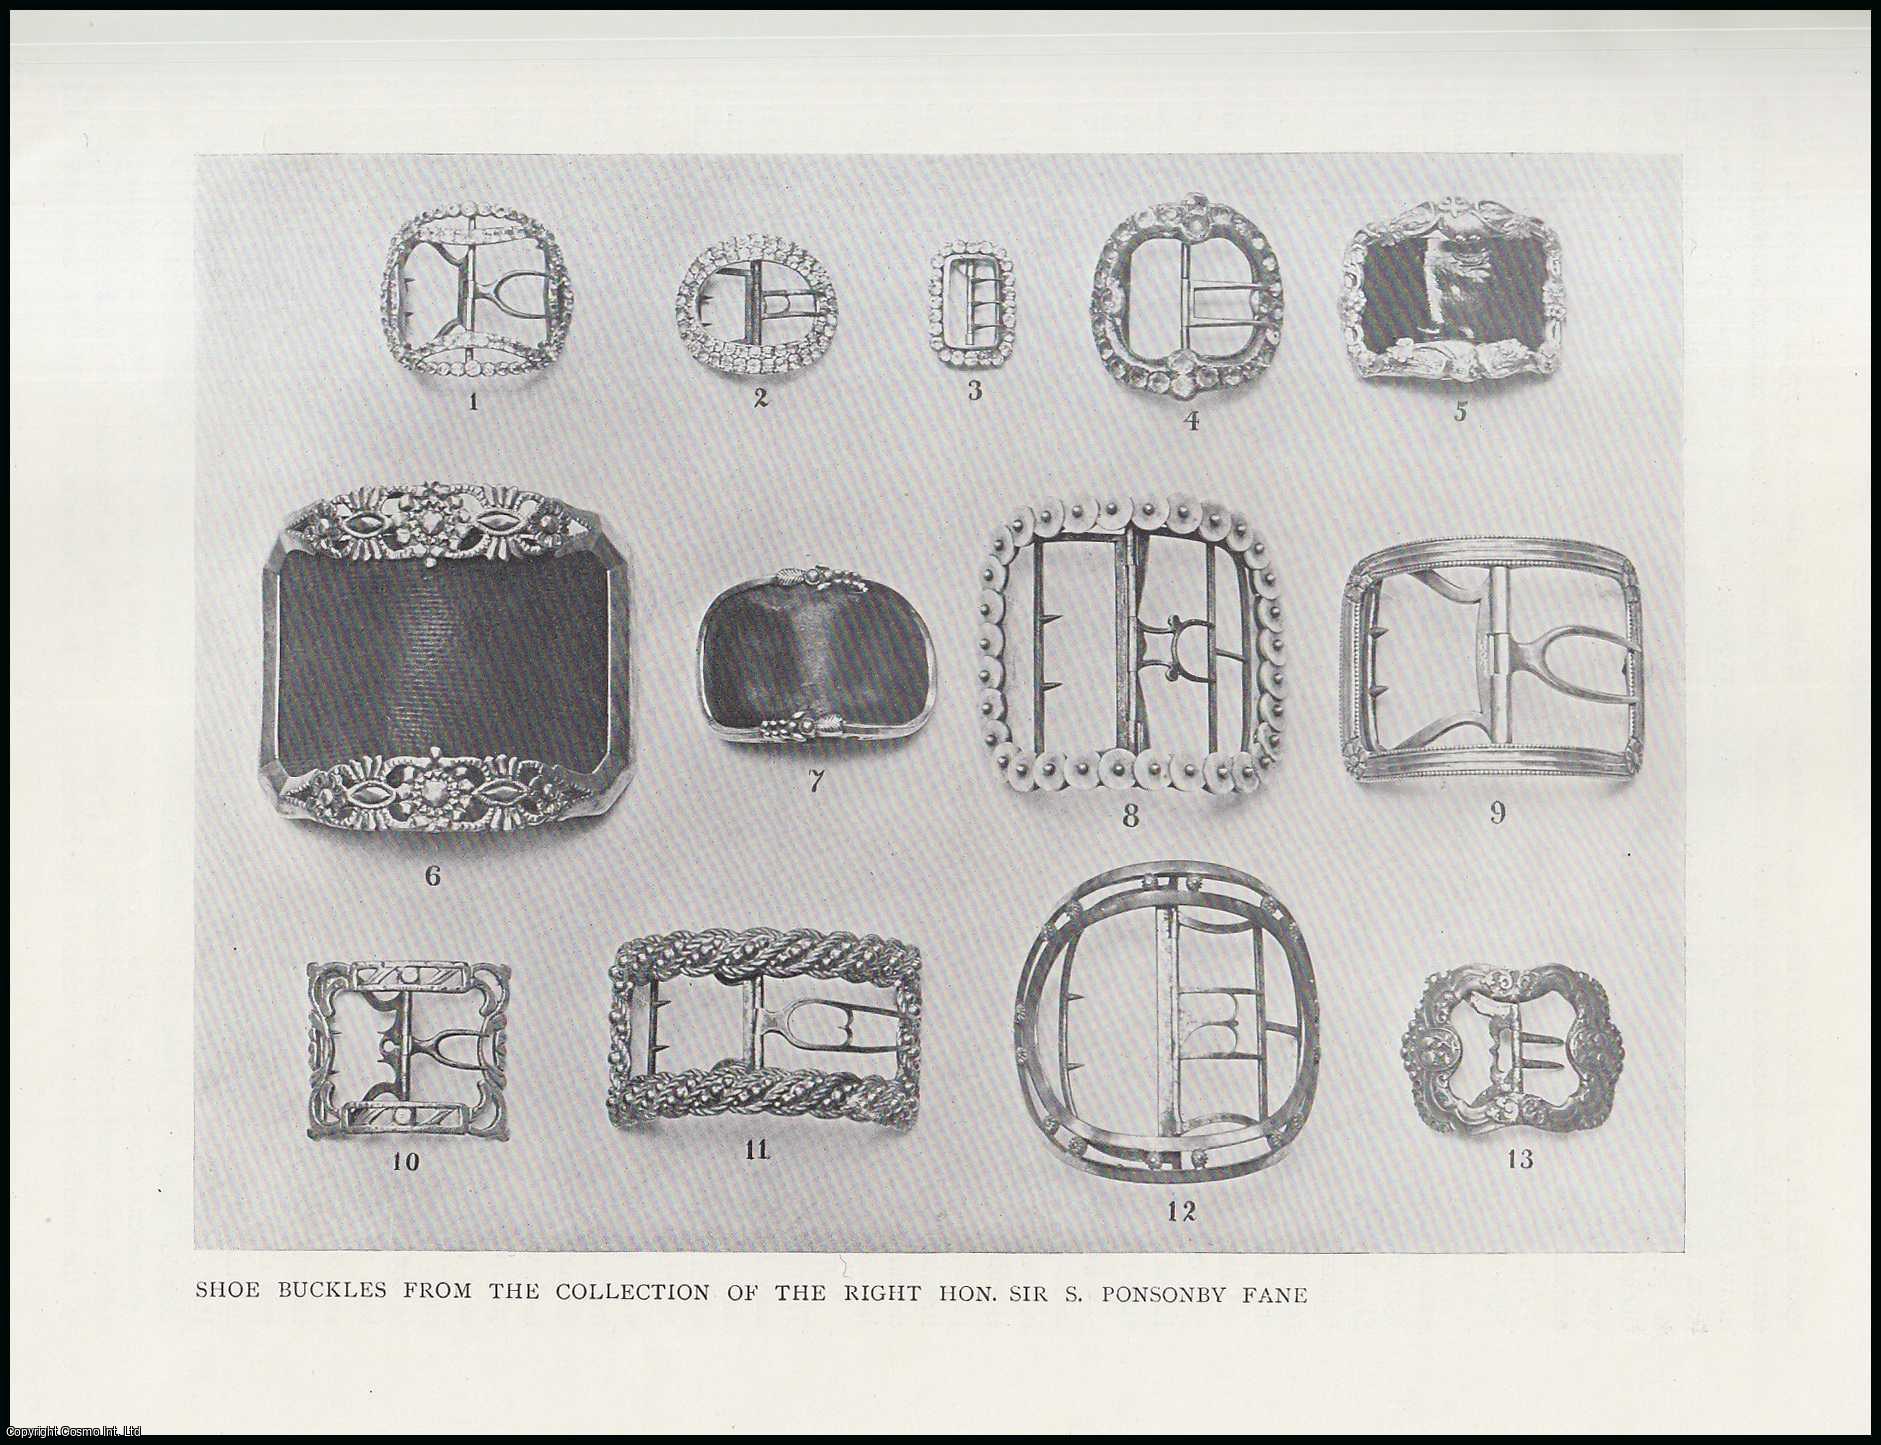 S. Ponsonby Fane - Shoe Buckles. An original article from The Connoisseur, 1905.